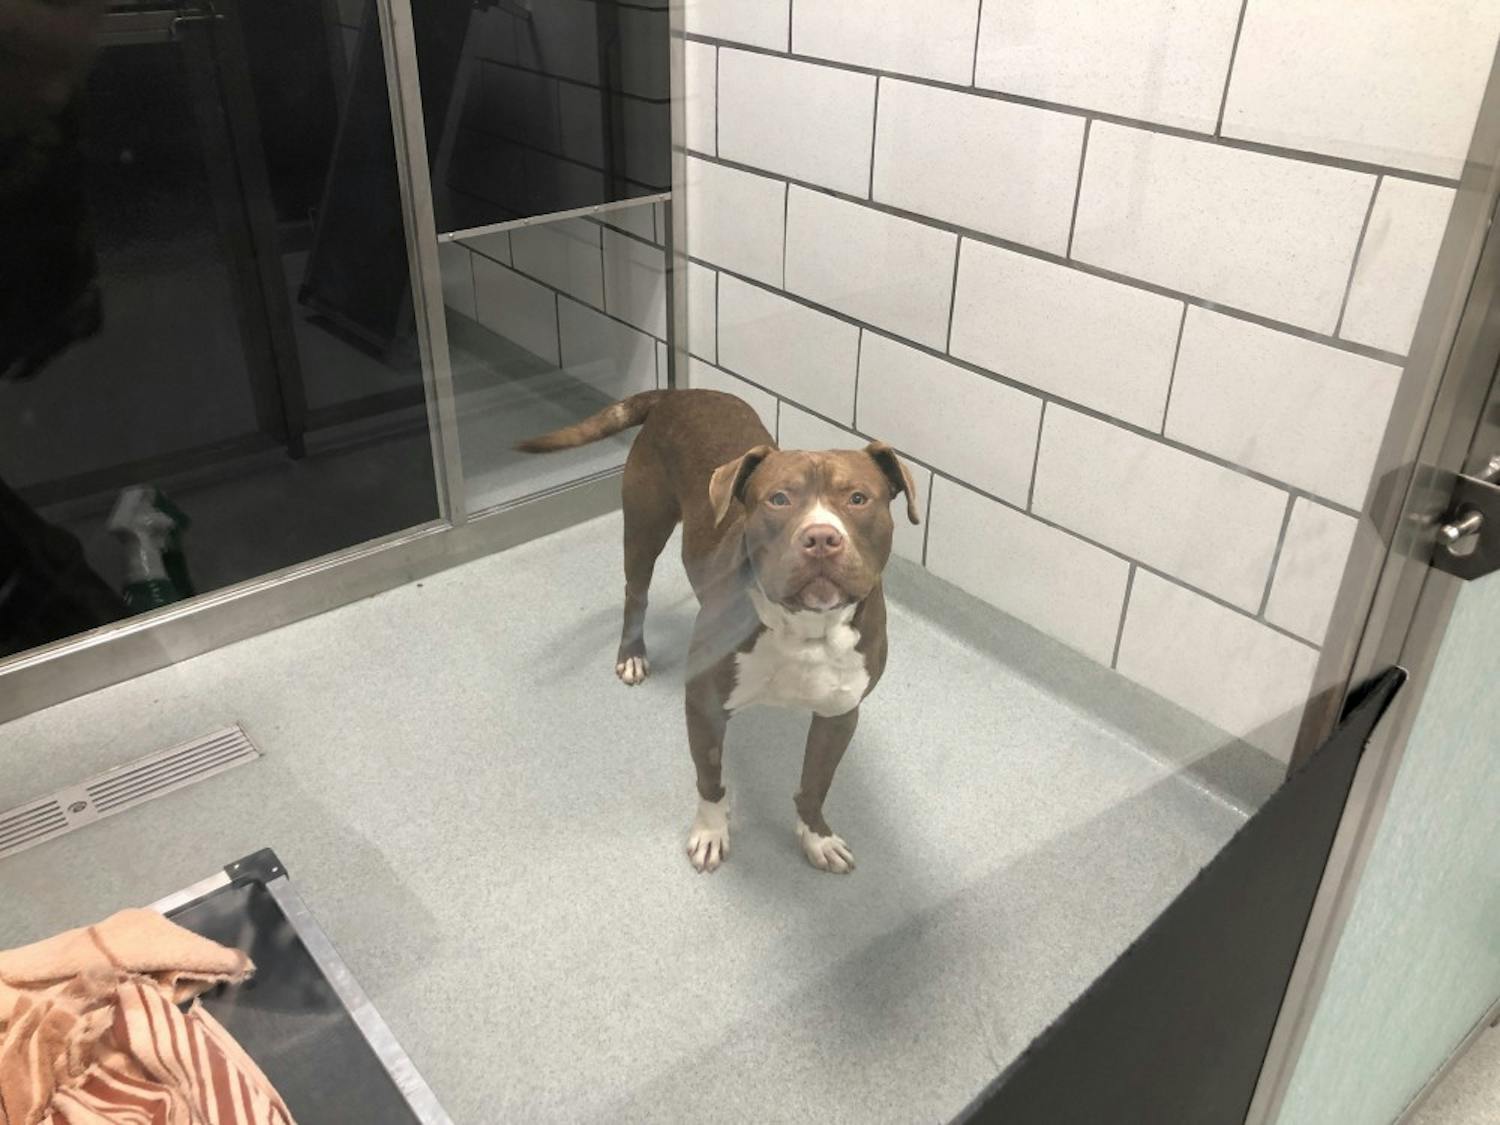 Harry is a one-year-old pit bull terrier that is available for adoption at the SPCA. Volunteers can apply to socialize and walk him.